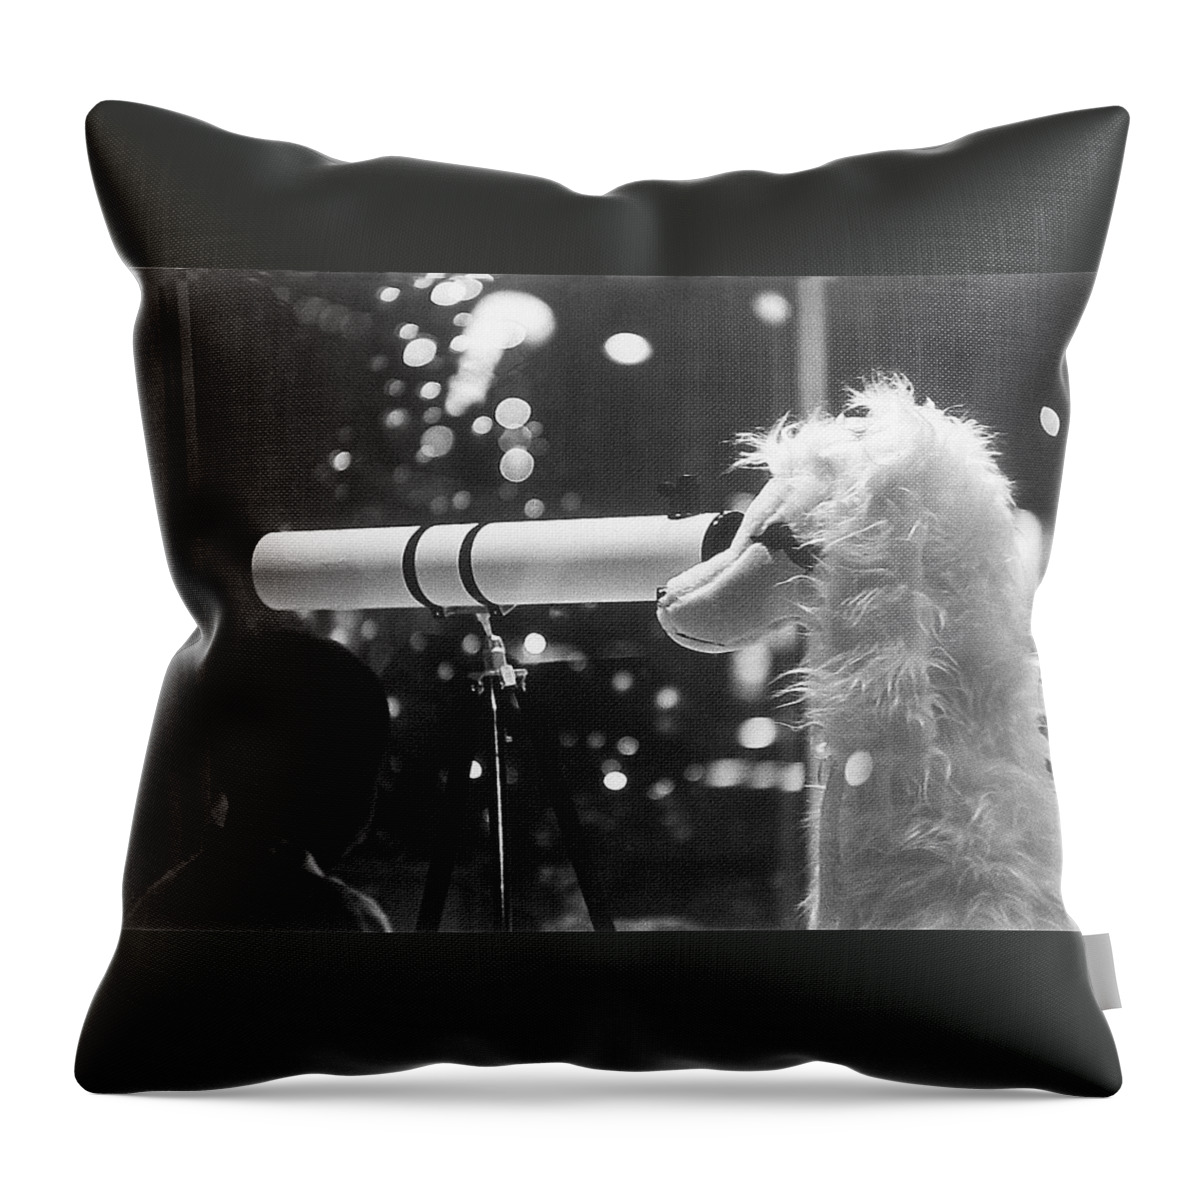 Downtown Tucson Arizona Store Window Christmas 1967 Throw Pillow featuring the photograph Downtown Tucson Arizona Store Window Christmas 1967 by David Lee Guss